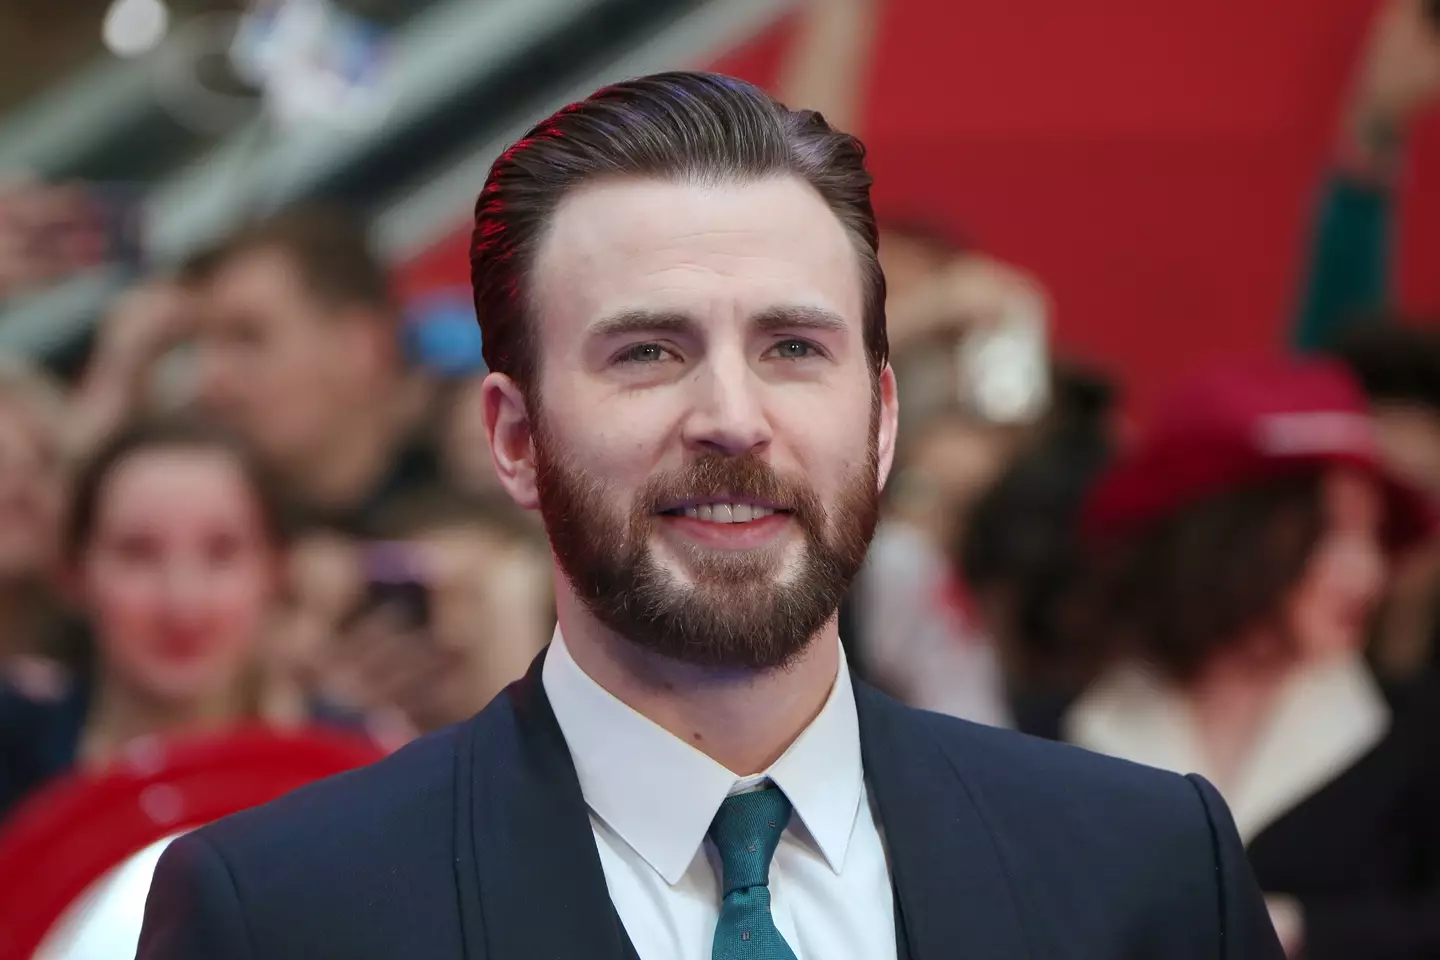 Chris Evans has revealed whether or not he’d return to the role of Captain America.